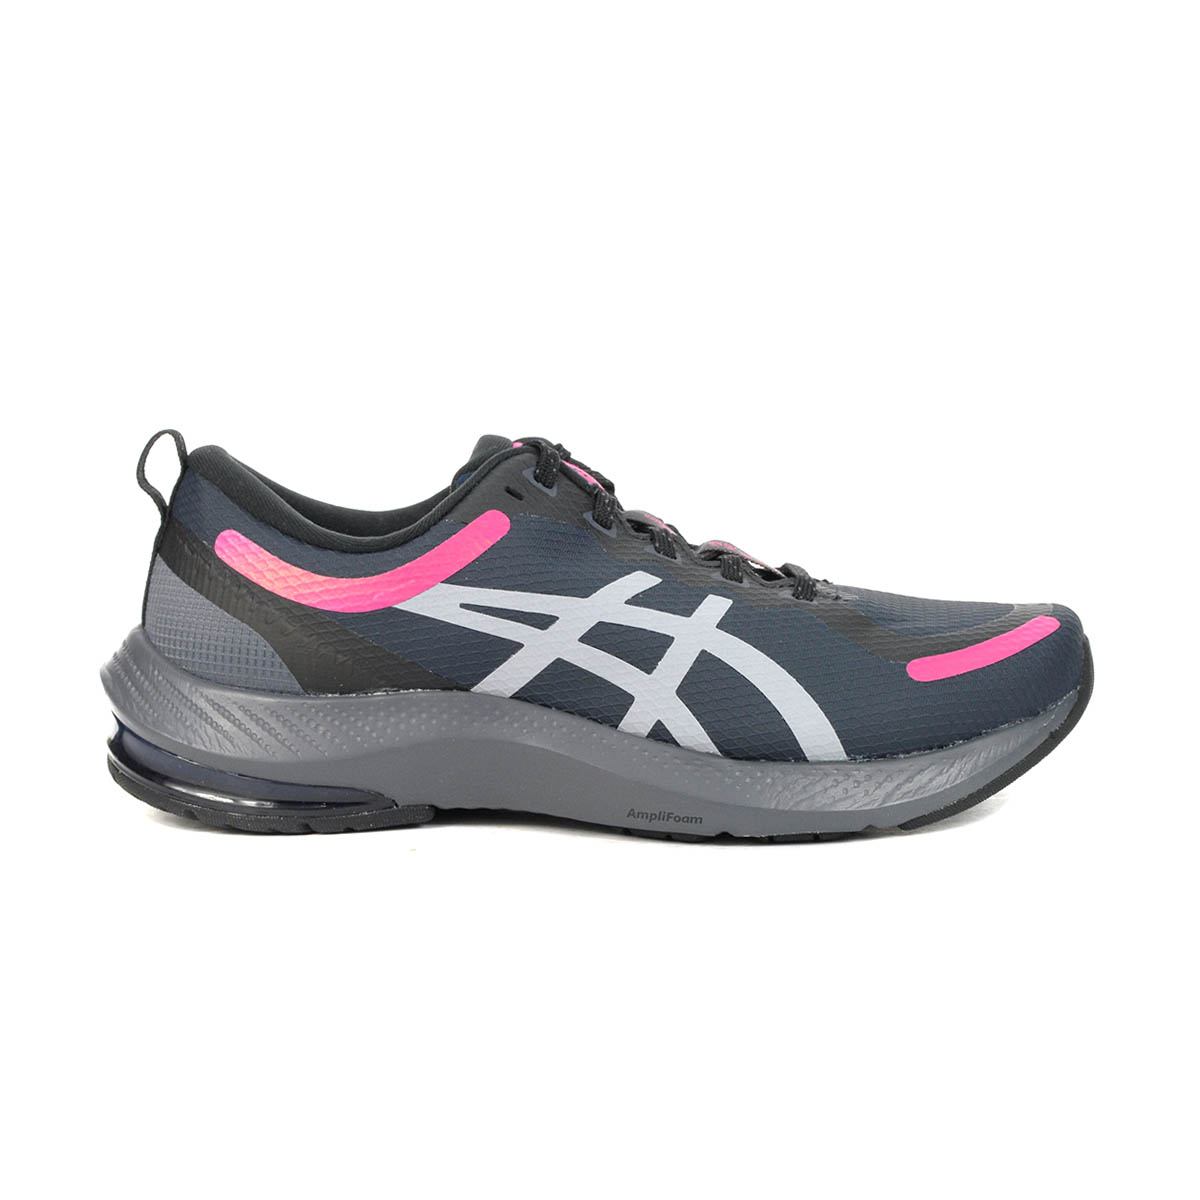 Women's AWL French Blue/Pink Rave Running Shoes 1012B154.400 WOOKI.COM